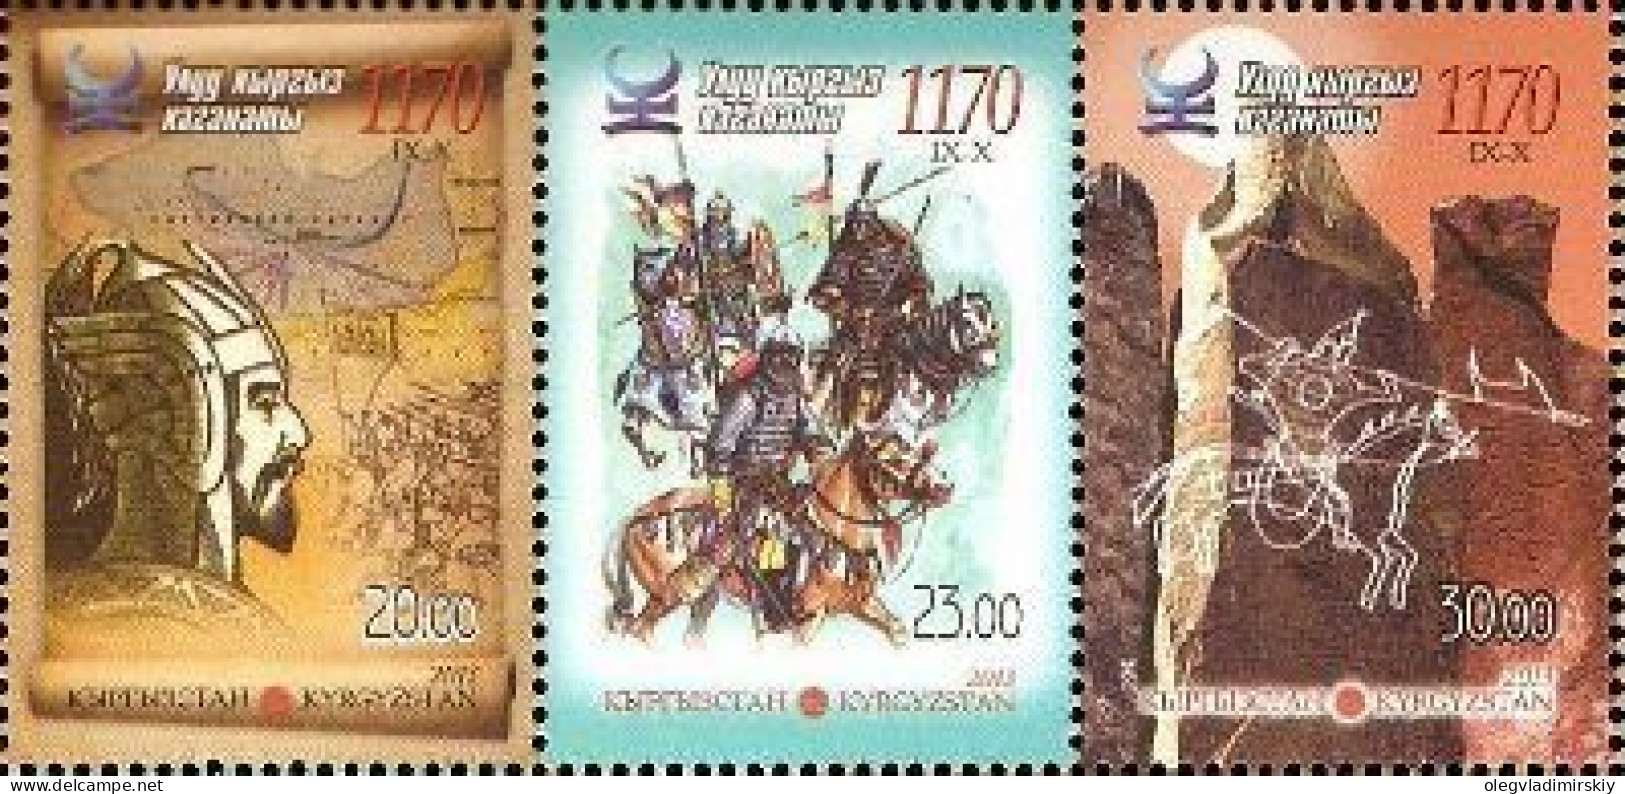 Kyrgyzstan 2013 Great Kyrgyz Kaganate 1170 Years Set Of 3 Stamps In Strip MNH - Archaeology